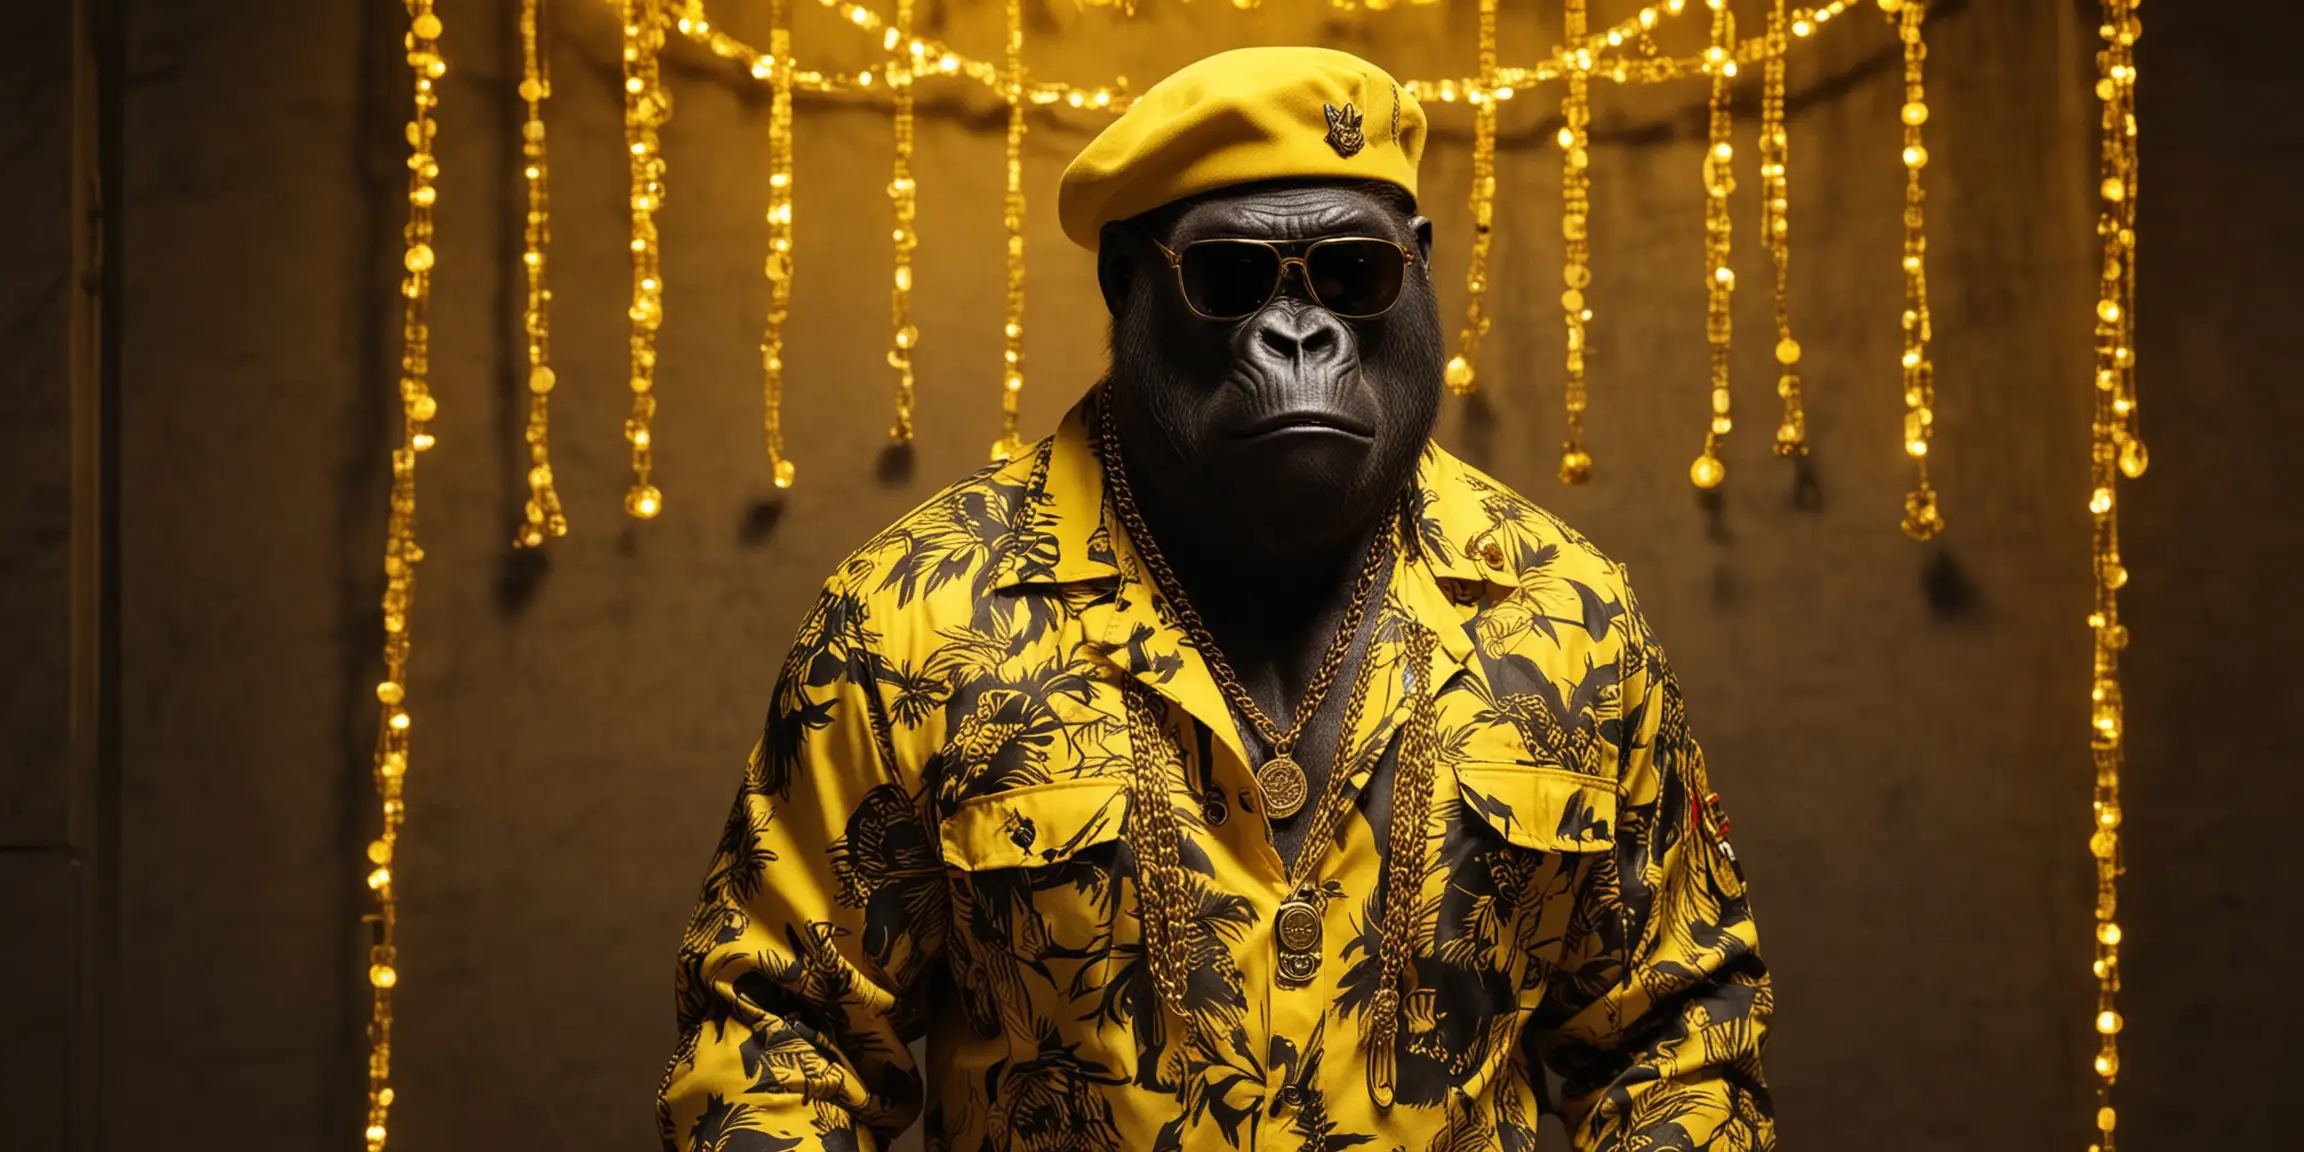 Gorilla in Stylish Yellow Hawaiian Military Attire with Gold Chains and Neon Backdrop